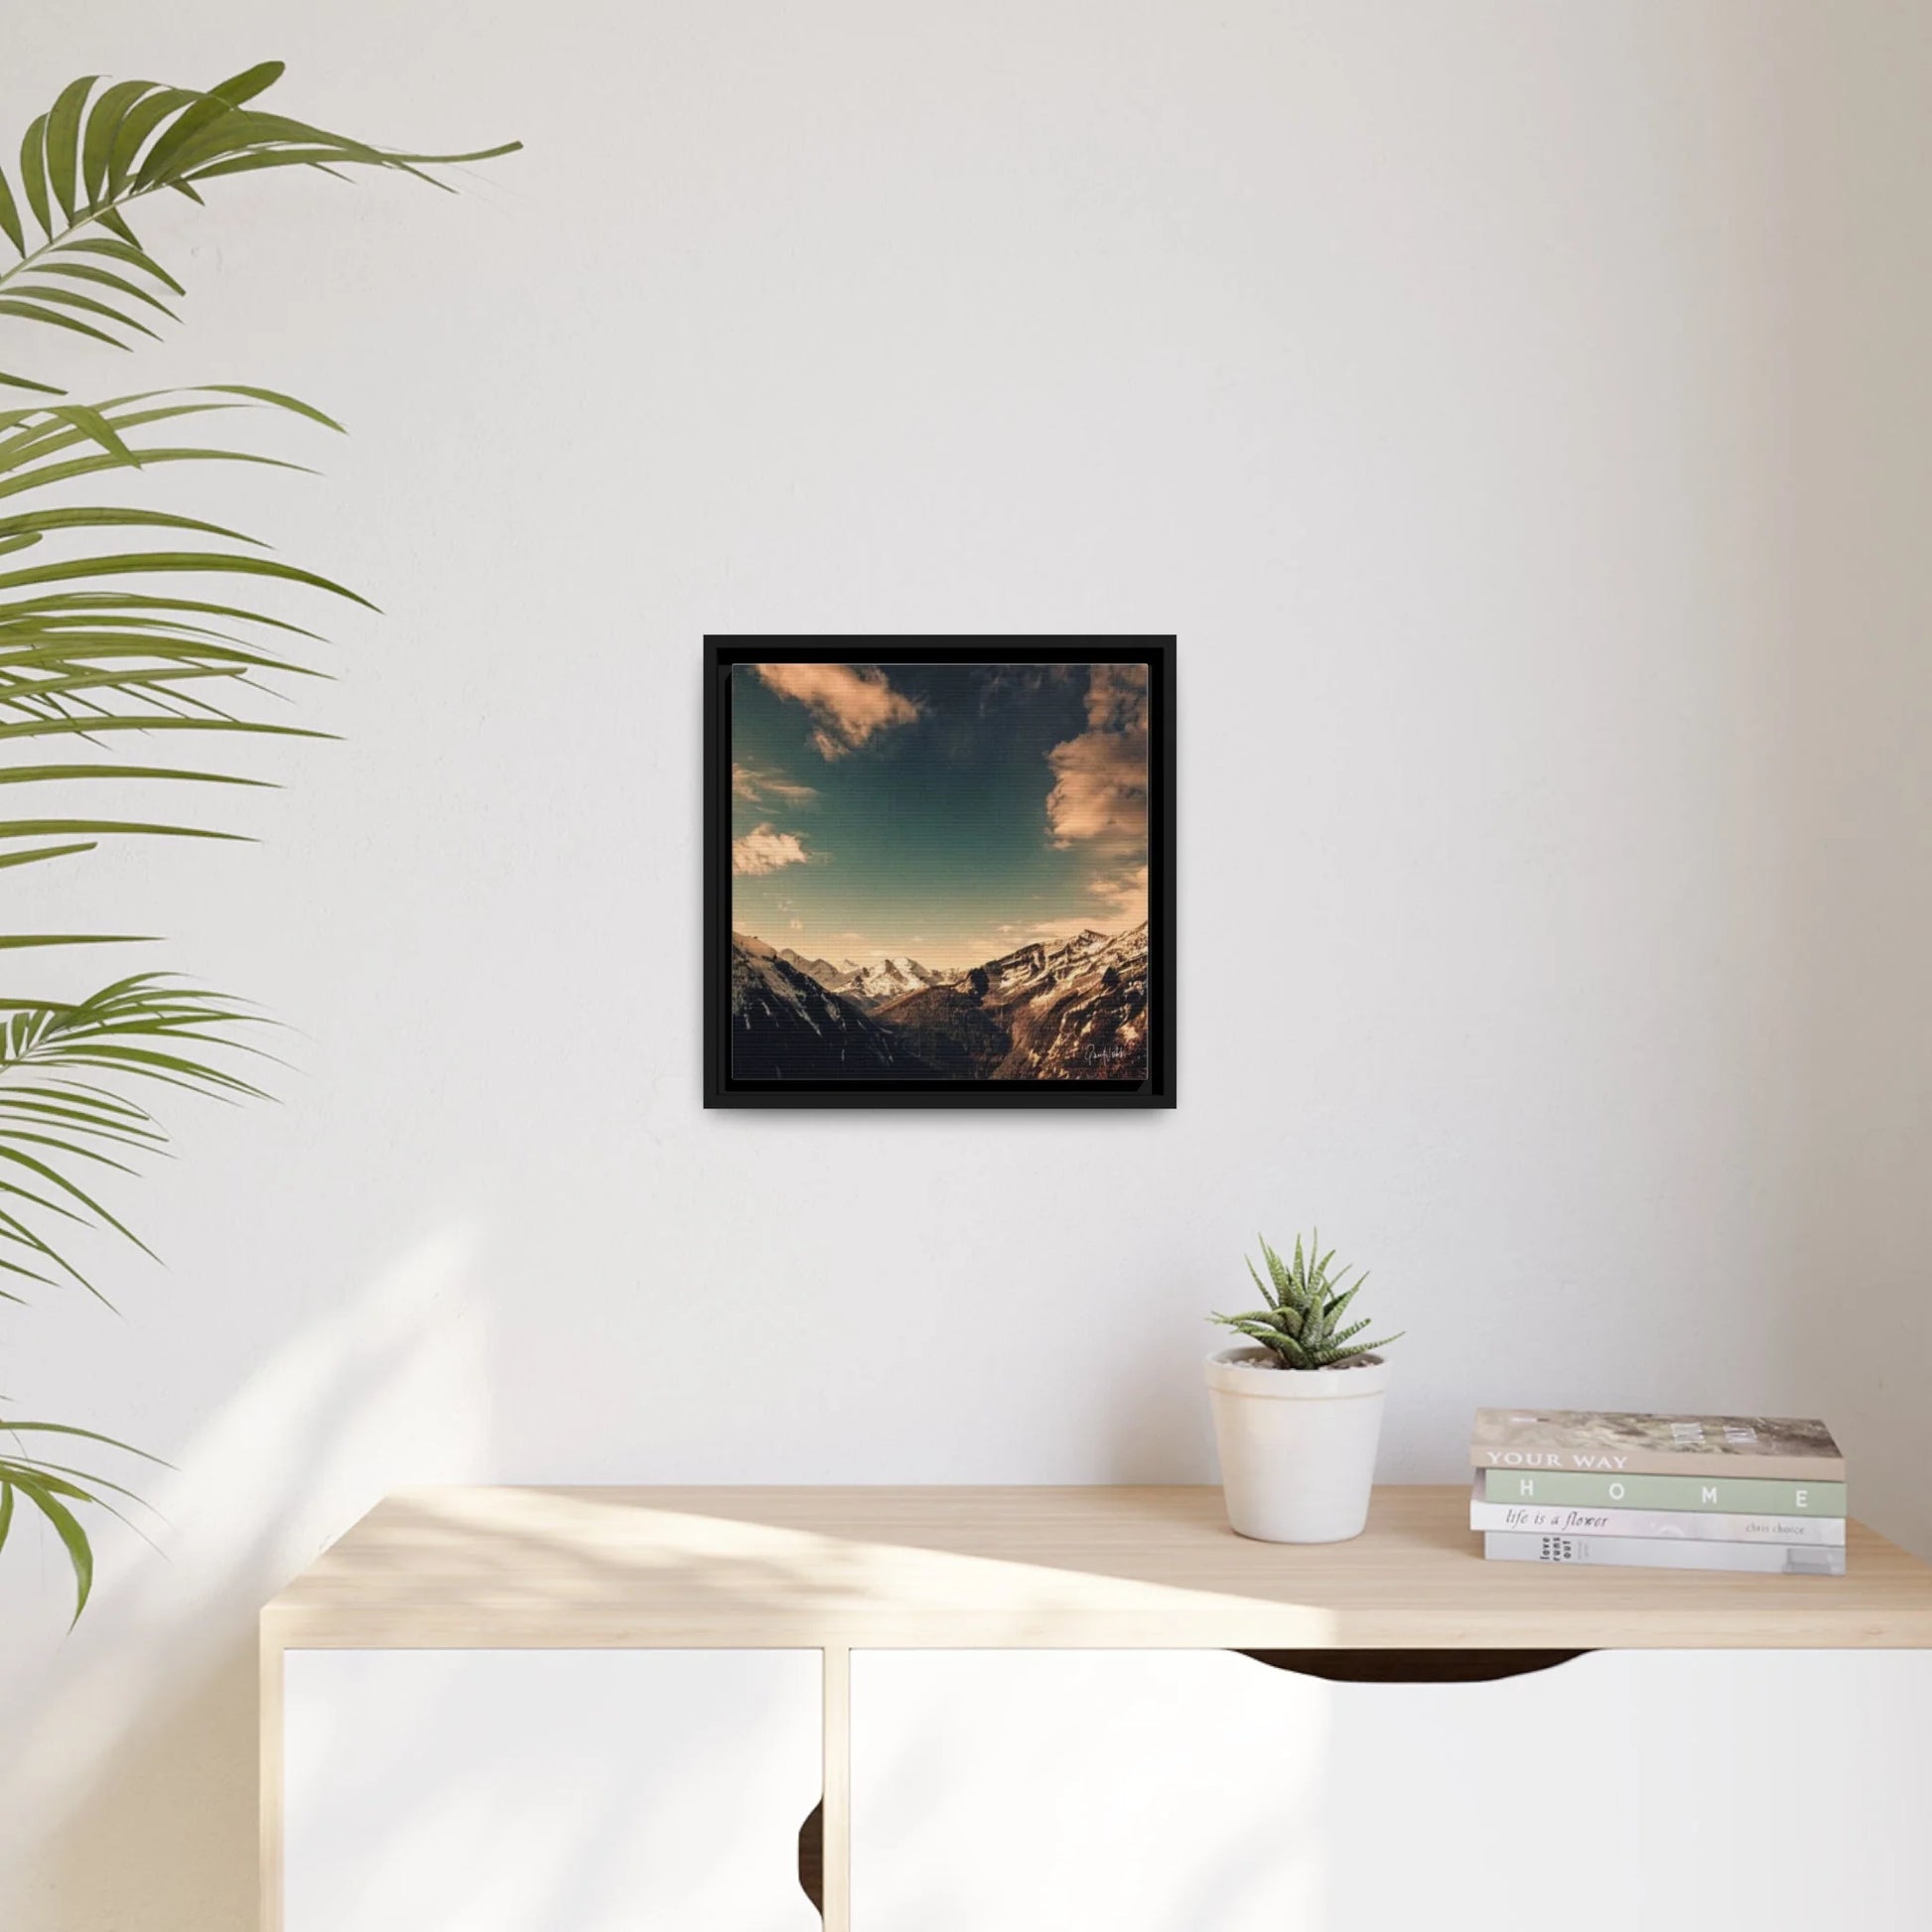 "Exquisite Framed Canvas Prints of Nature's Fine Art Photography by Queennoble"